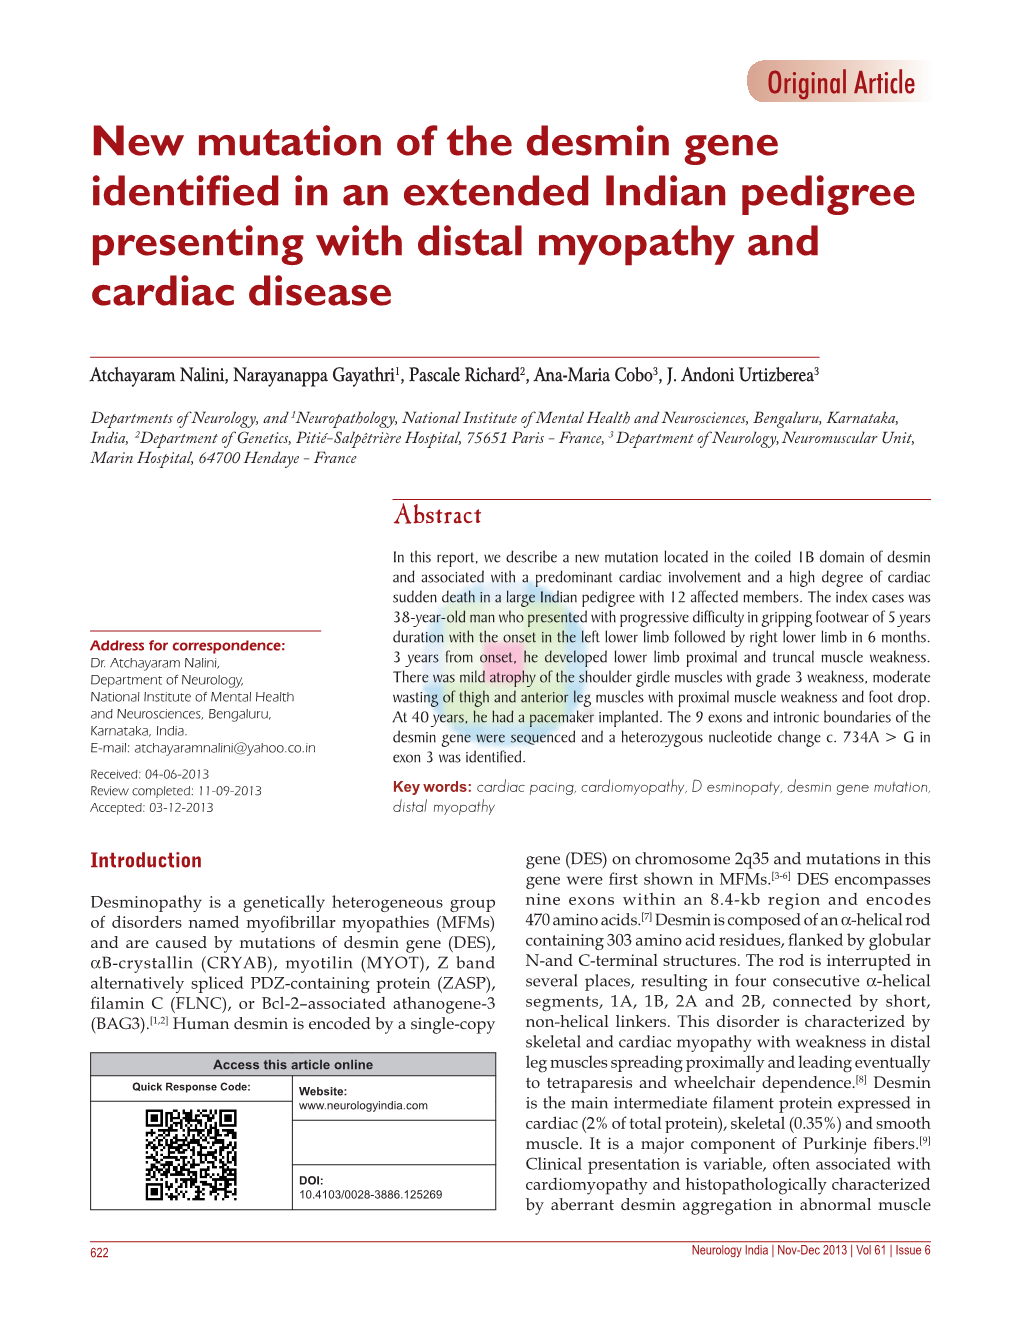 New Mutation of the Desmin Gene Identified in an Extended Indian Pedigree Presenting with Distal Myopathy and Cardiac Disease